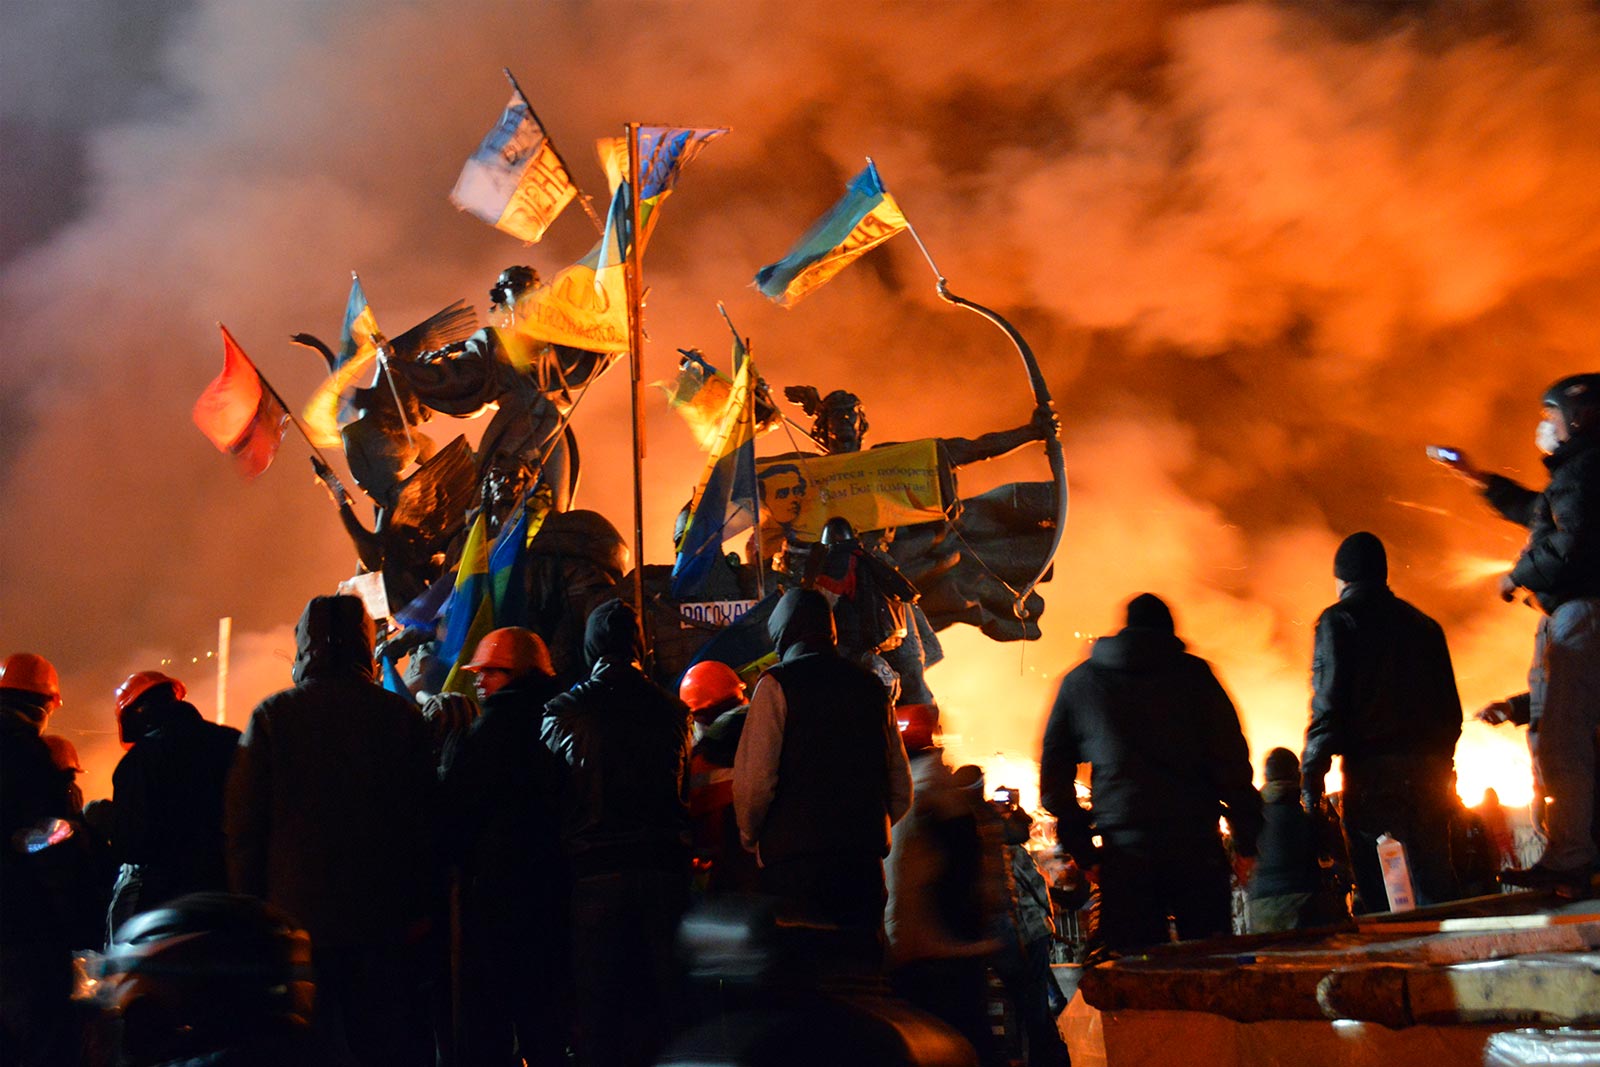 Maidan and its significance. A historical retrospective